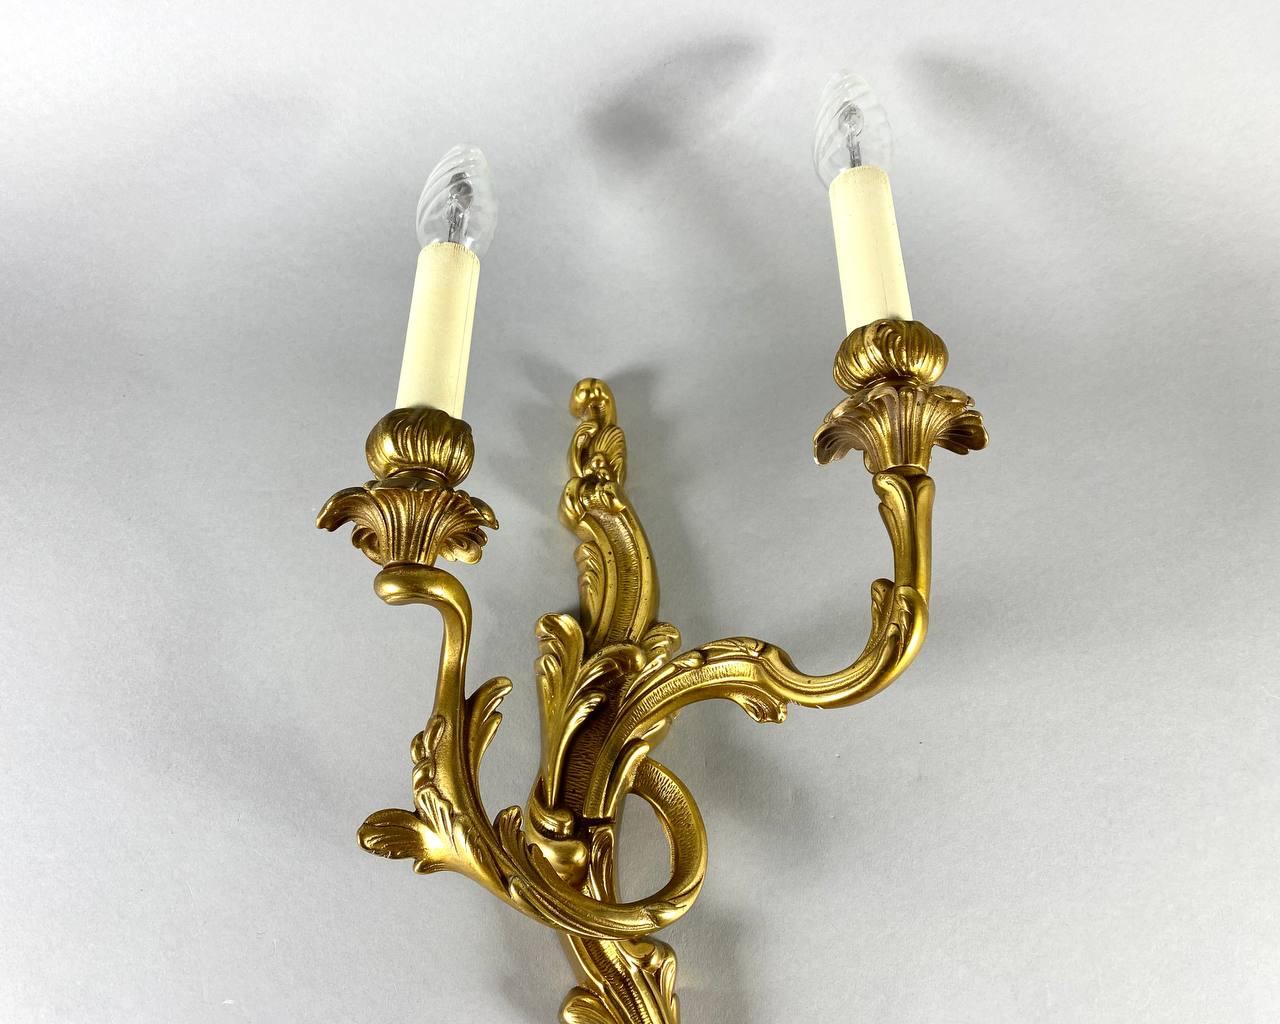 Amazing Large Wall Sconce in Gilt Bronze Vintage Wall Sconce, 20th Century For Sale 2